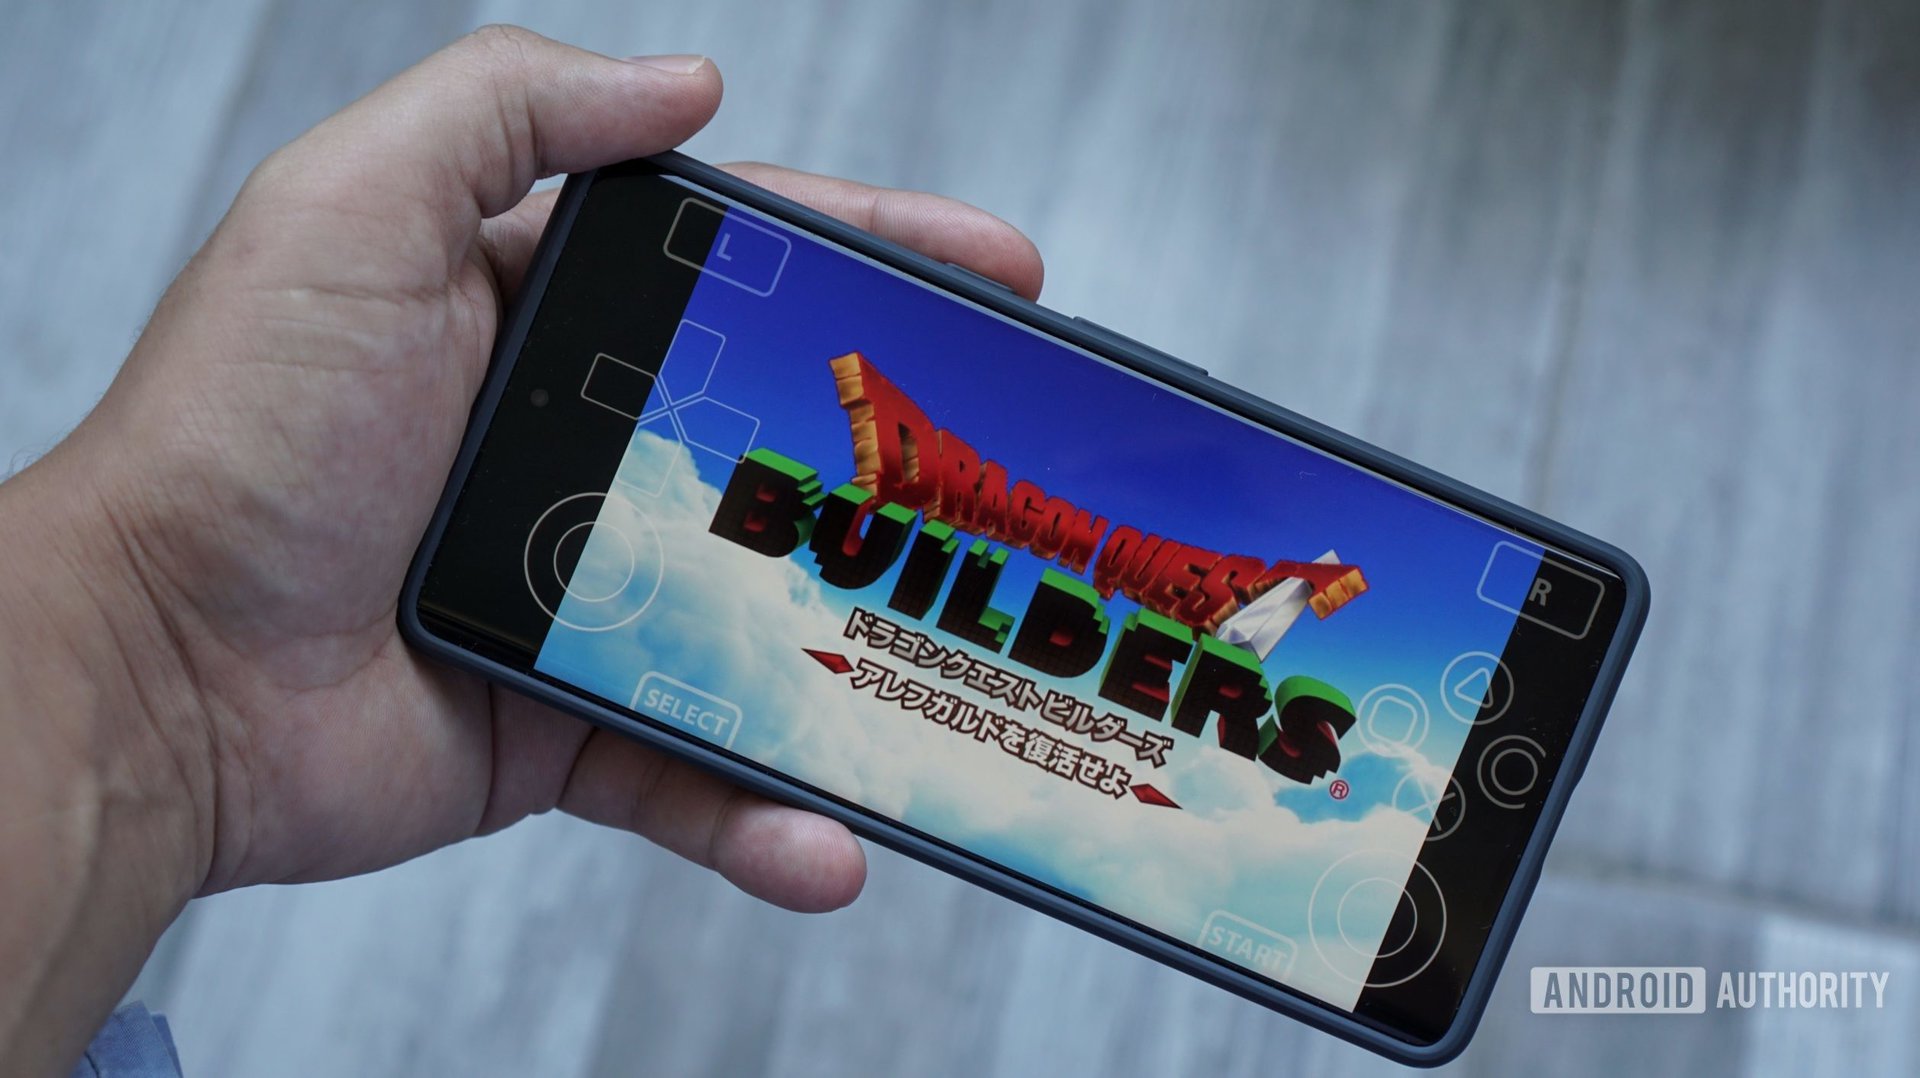 Play PC games on your Android phone for free using Winlator 2.0